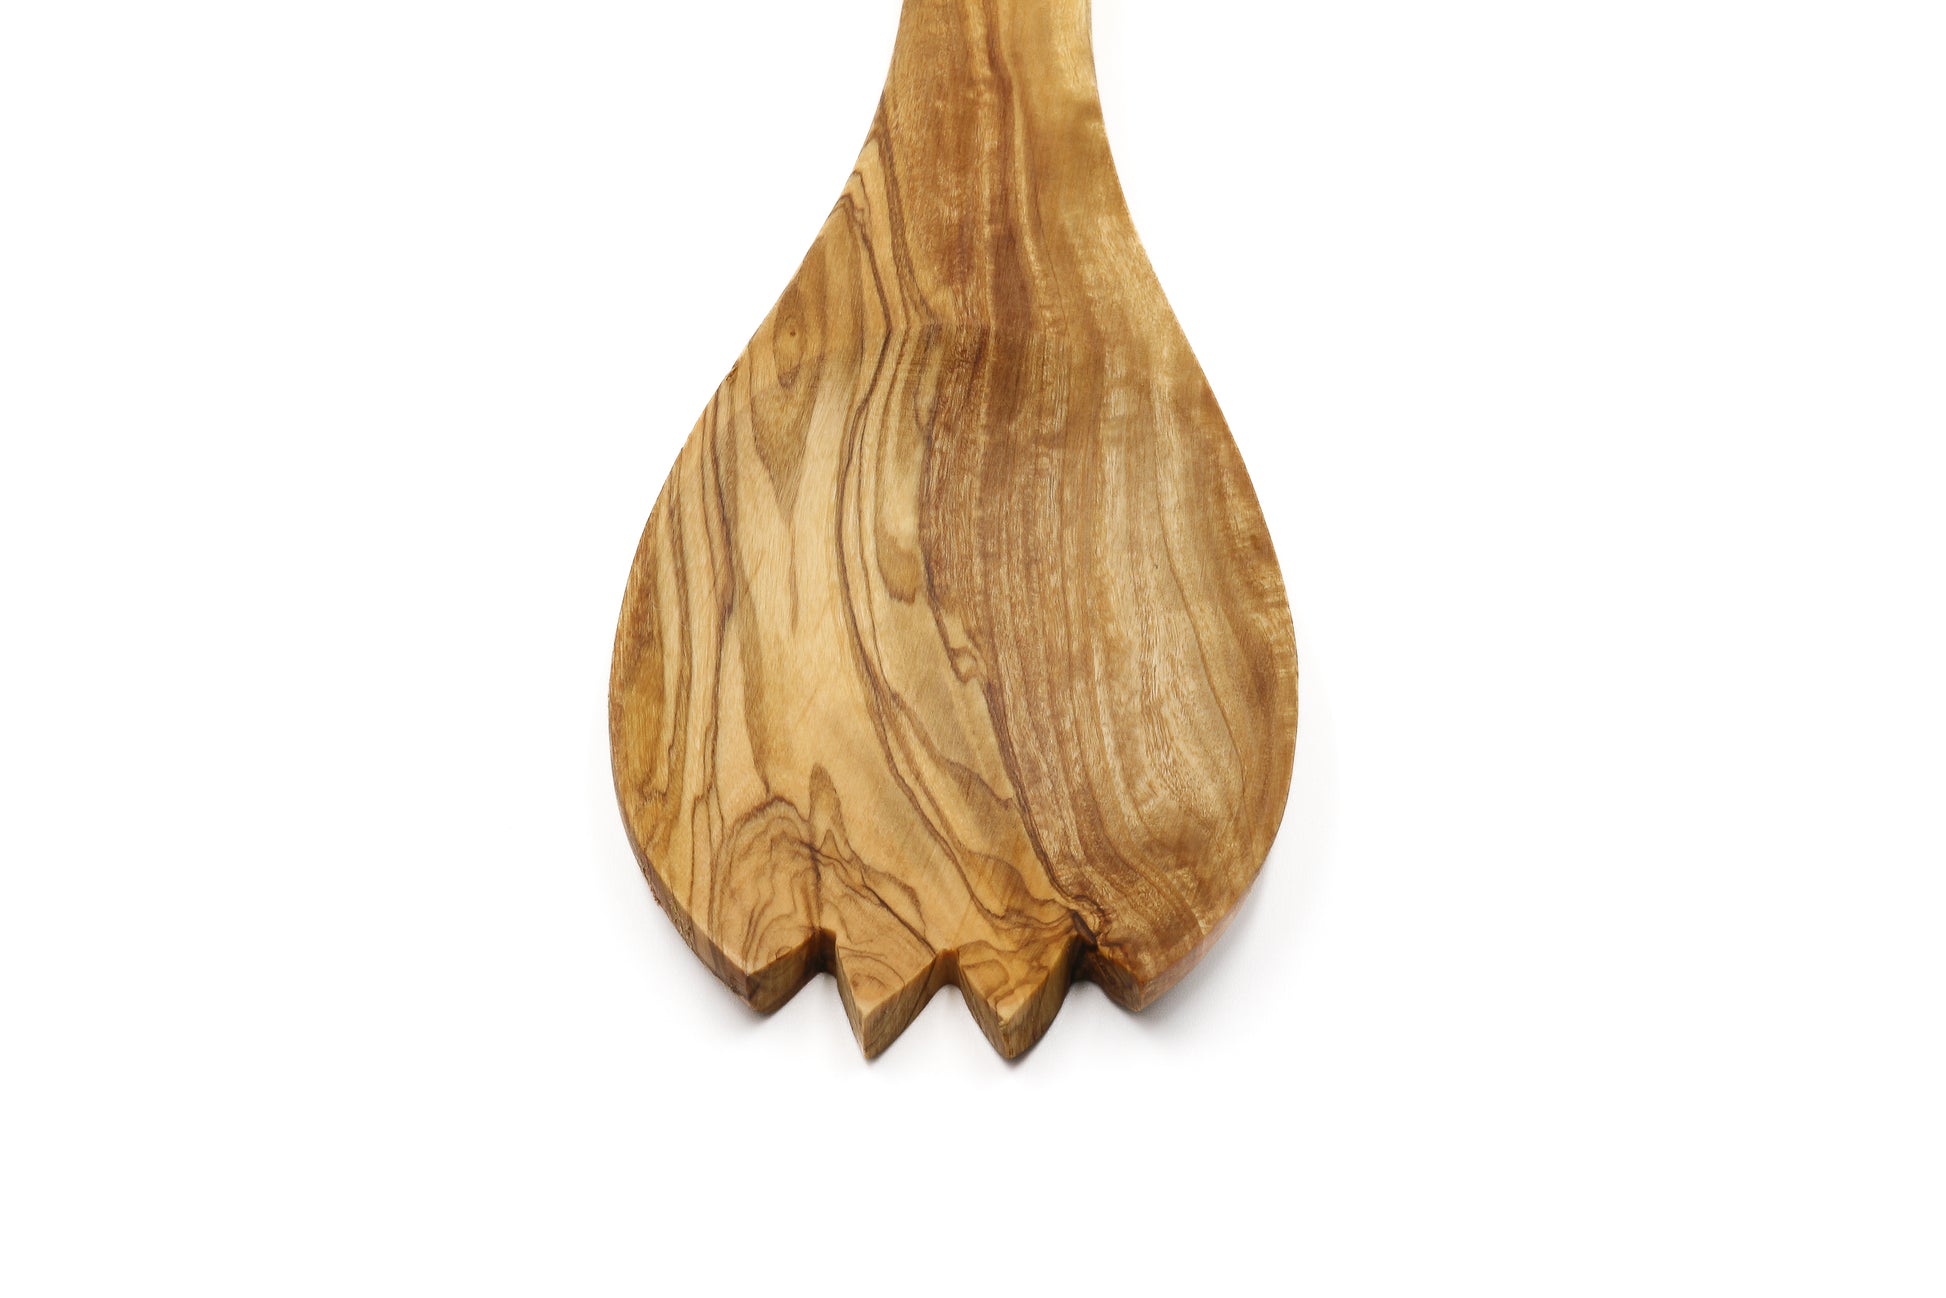 Olive wood toothed spoon